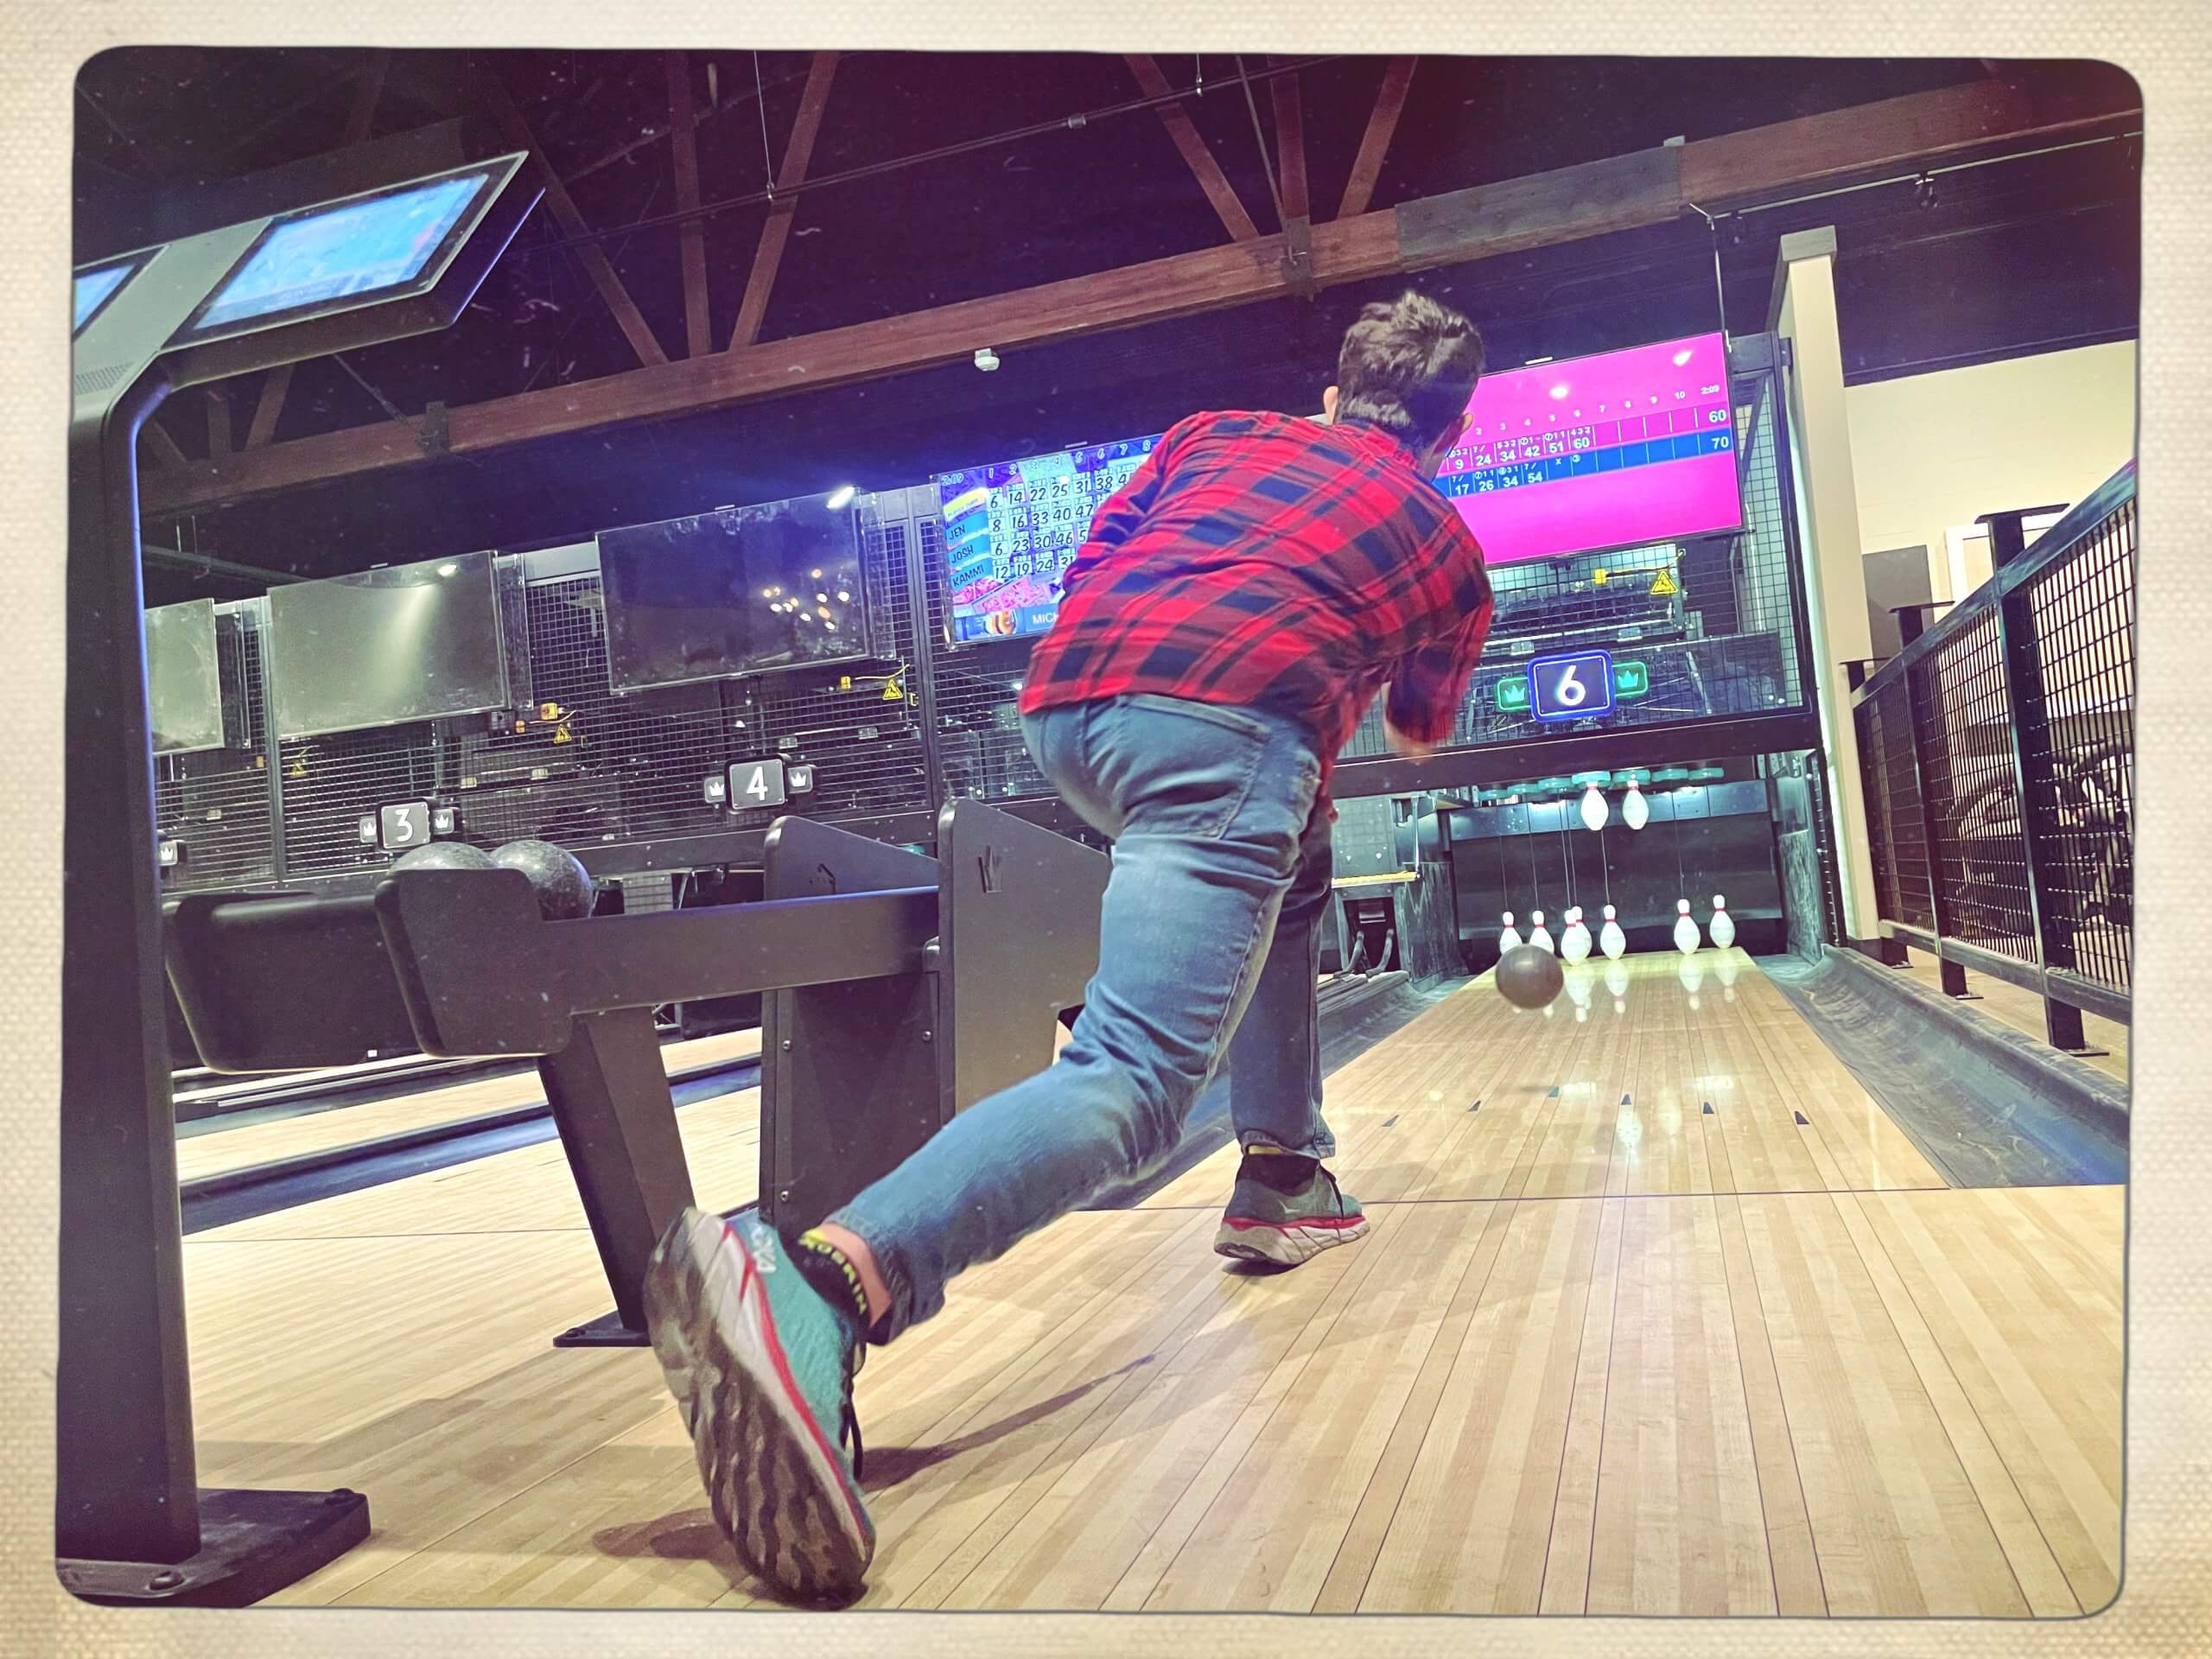 Duckpin bowling is a great form of social entertainment in downtown Muskegon!